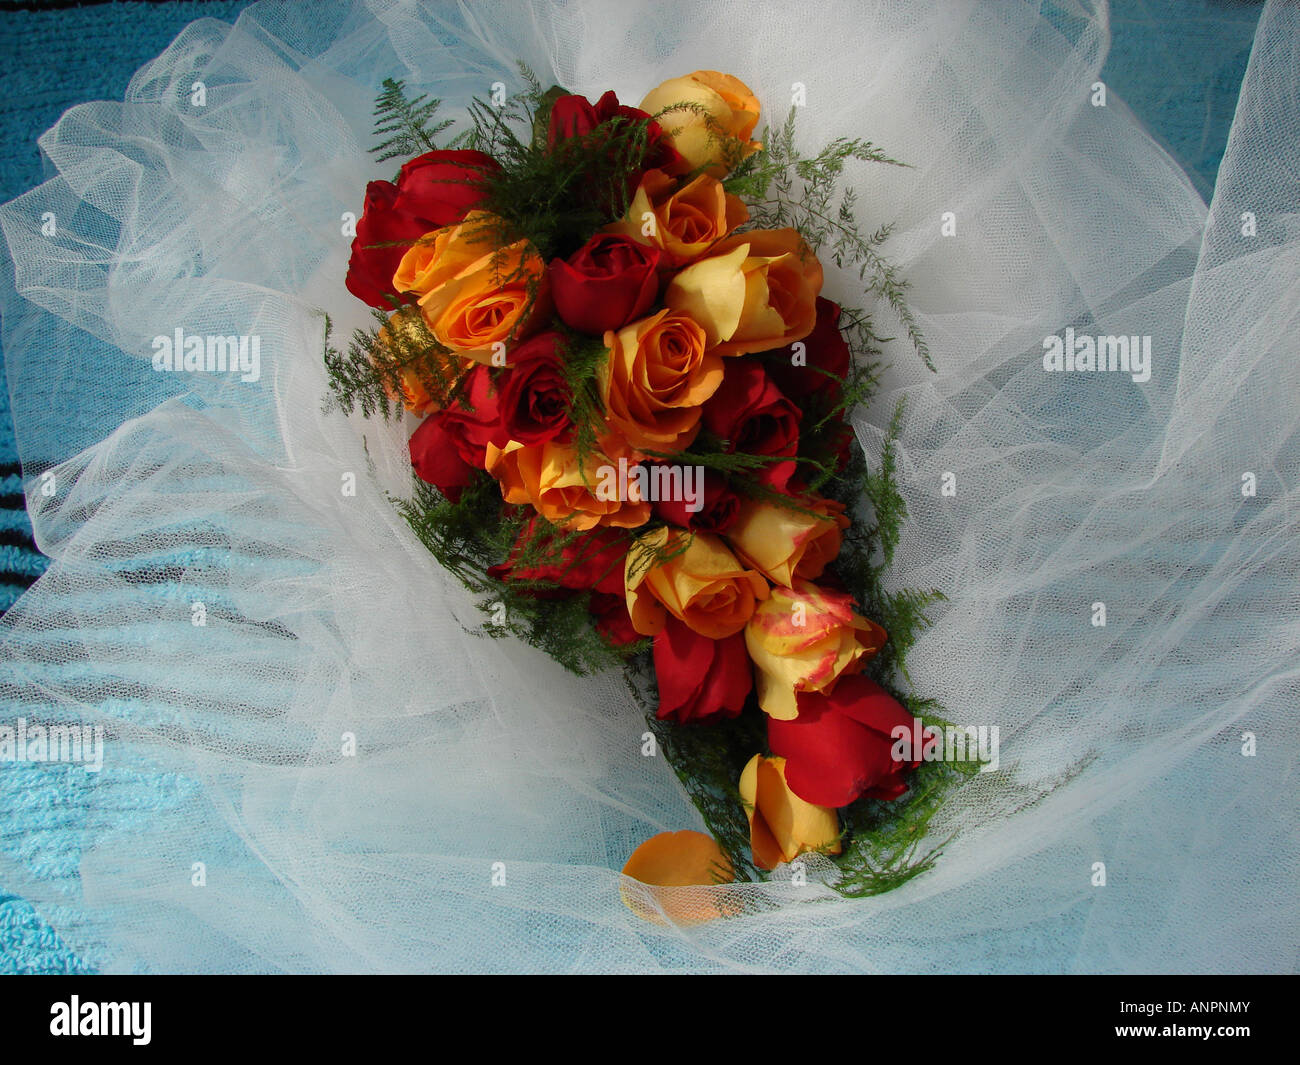 Bride Bouquet made of red and yellow roses Stock Photo